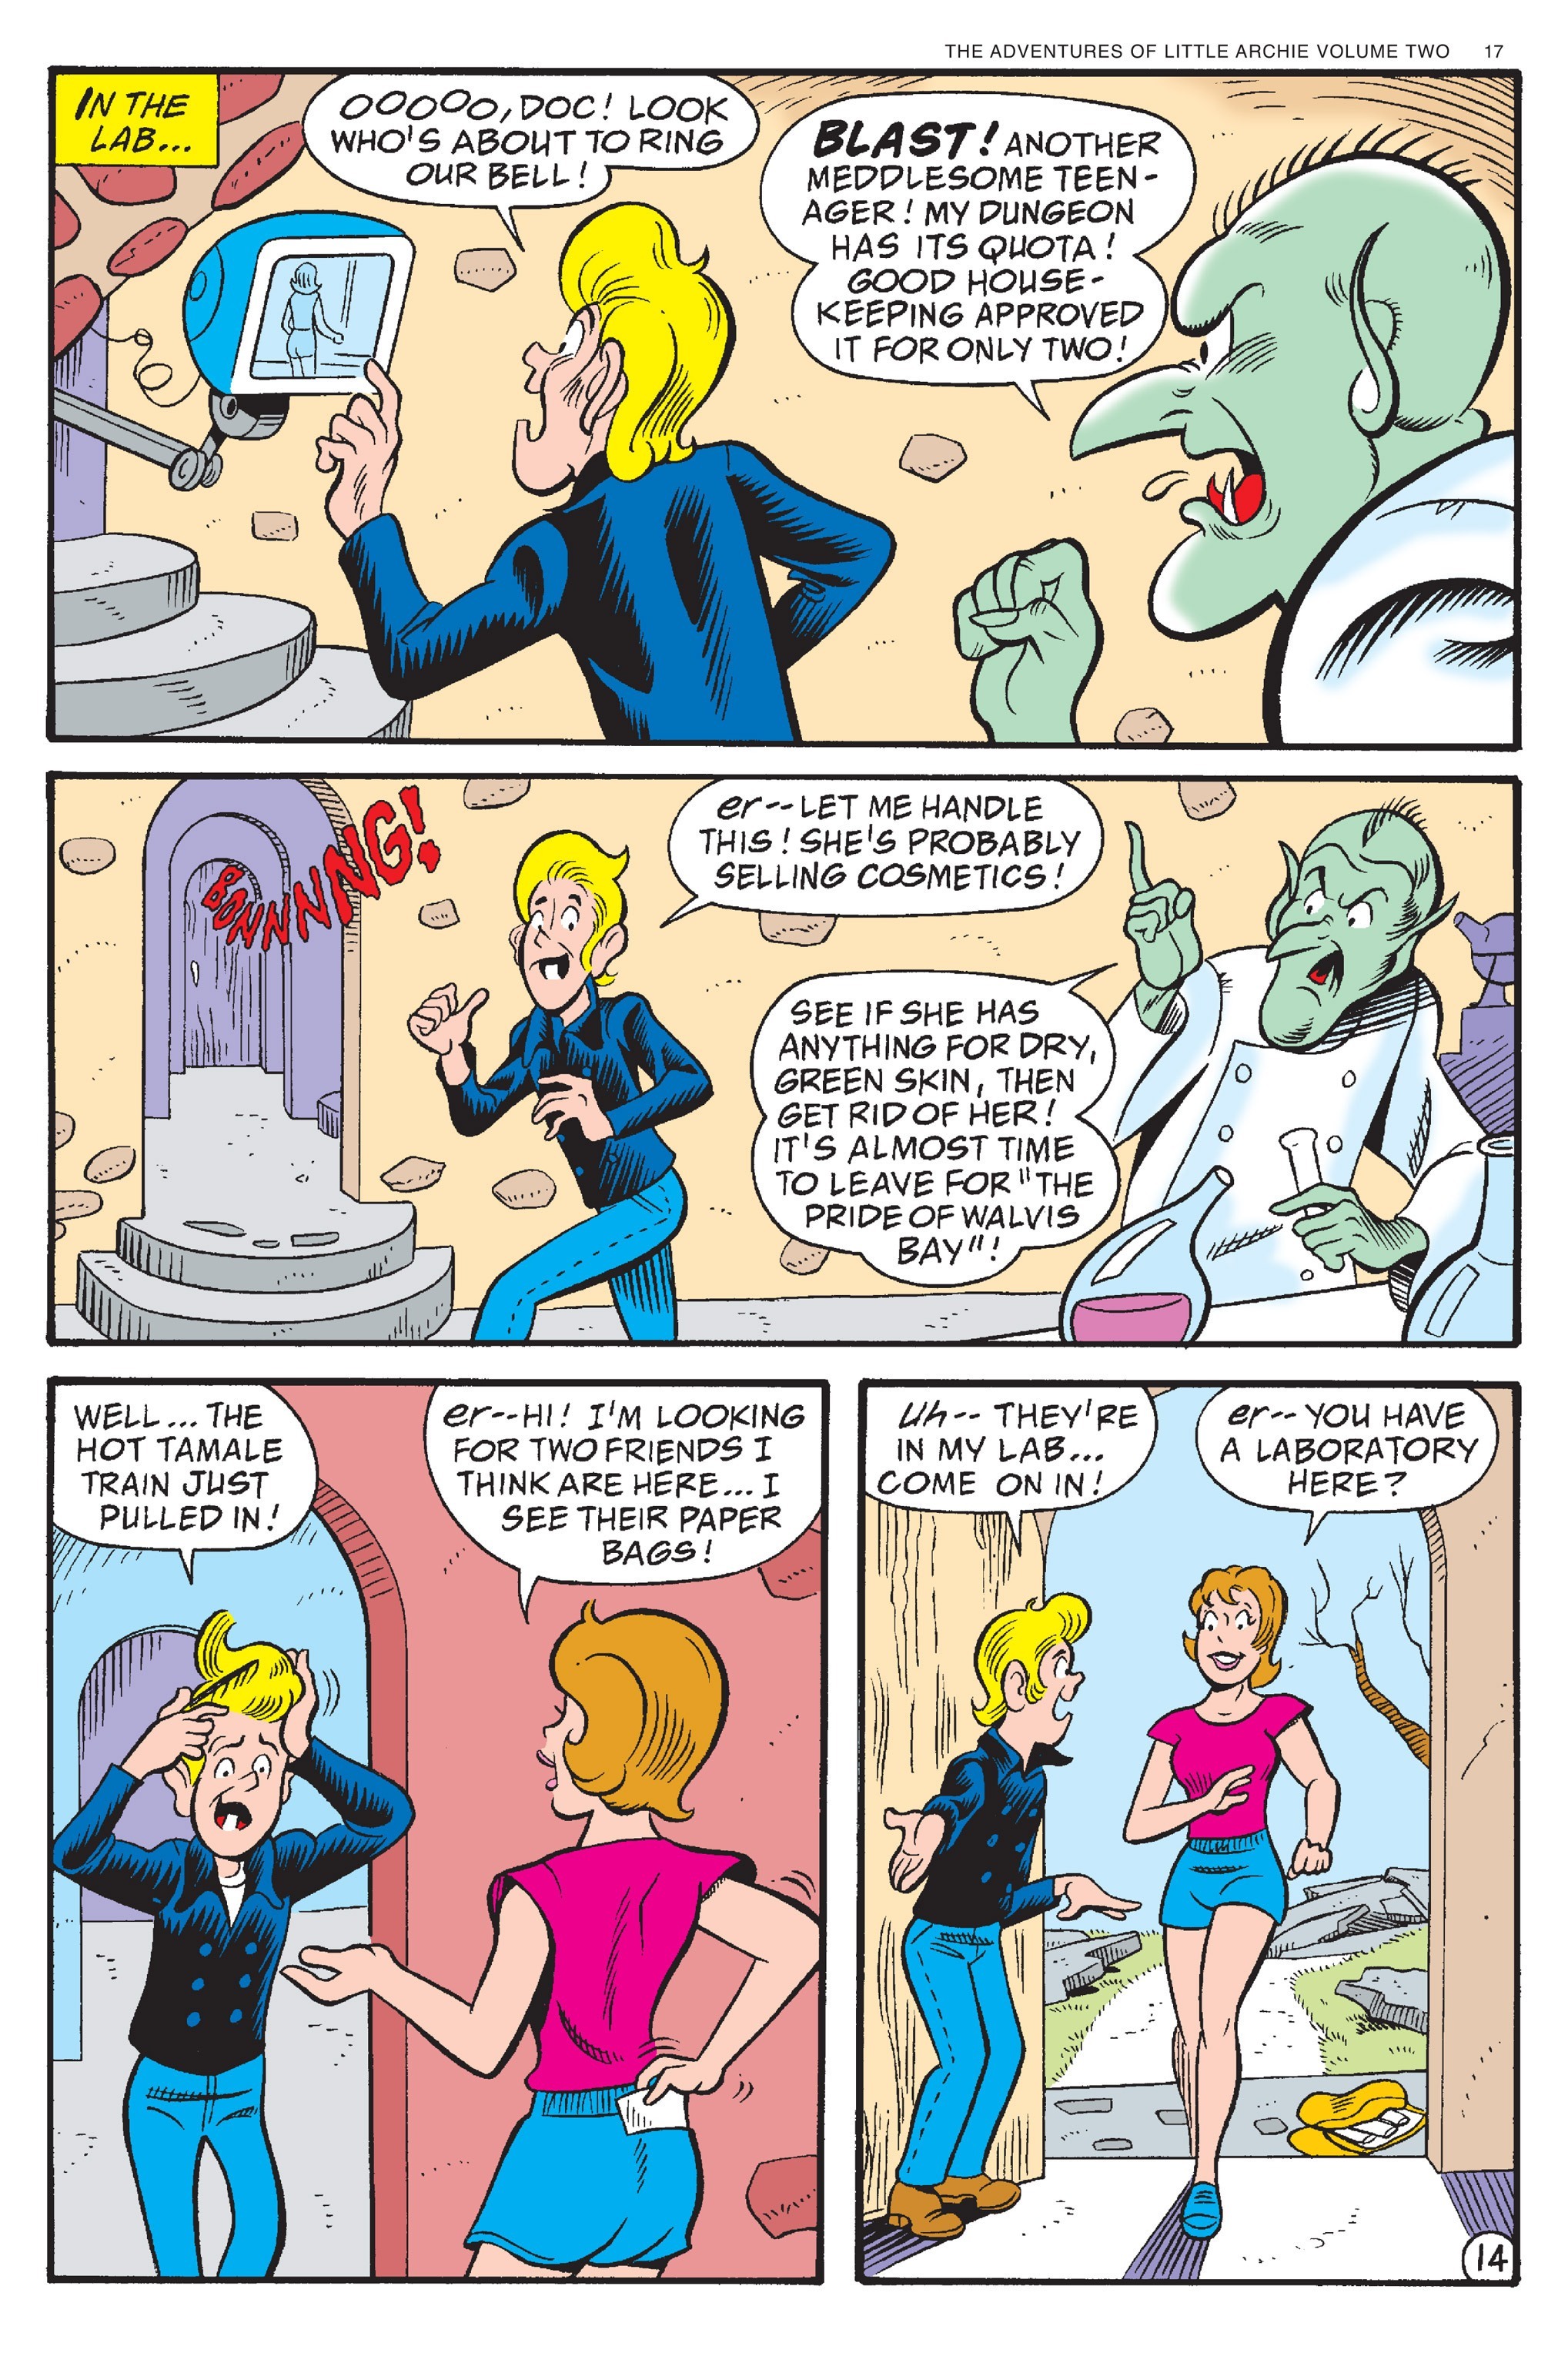 Read online Adventures of Little Archie comic -  Issue # TPB 2 - 18